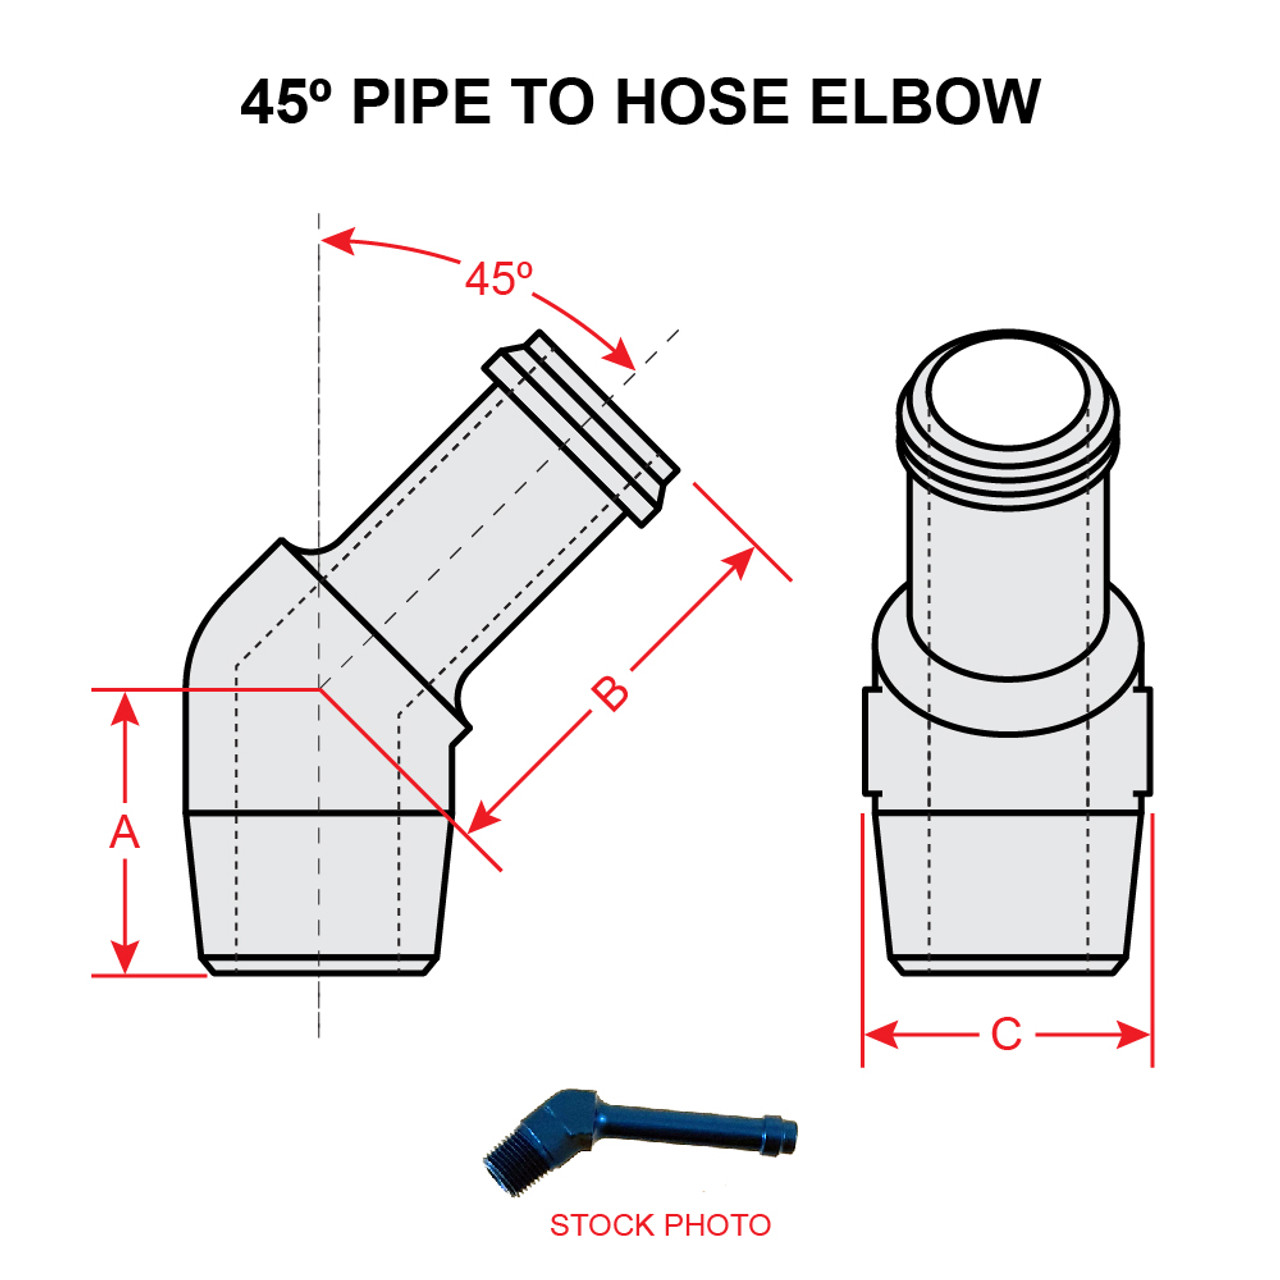 AN844-16   45 DEGREE PIPE TO HOSE ELBOW